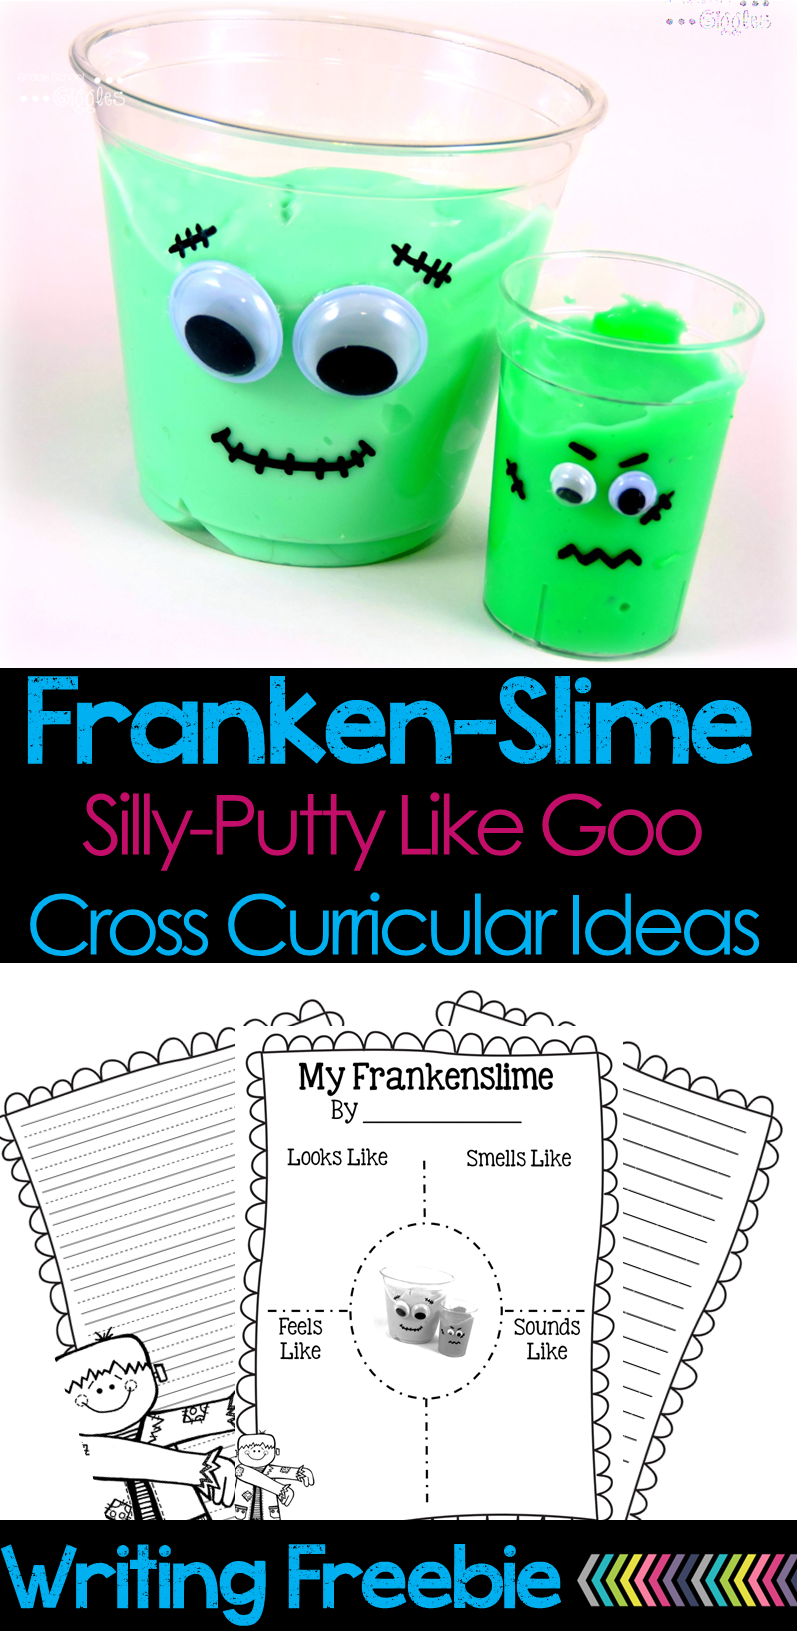 Slime, goo, GAK, silly-putty….Whatever you call it, goo is fun! These “Franken-Slime” cups are a great project to do with the kids. There’s a writing freebie and ideas for cross-curricular integration too!